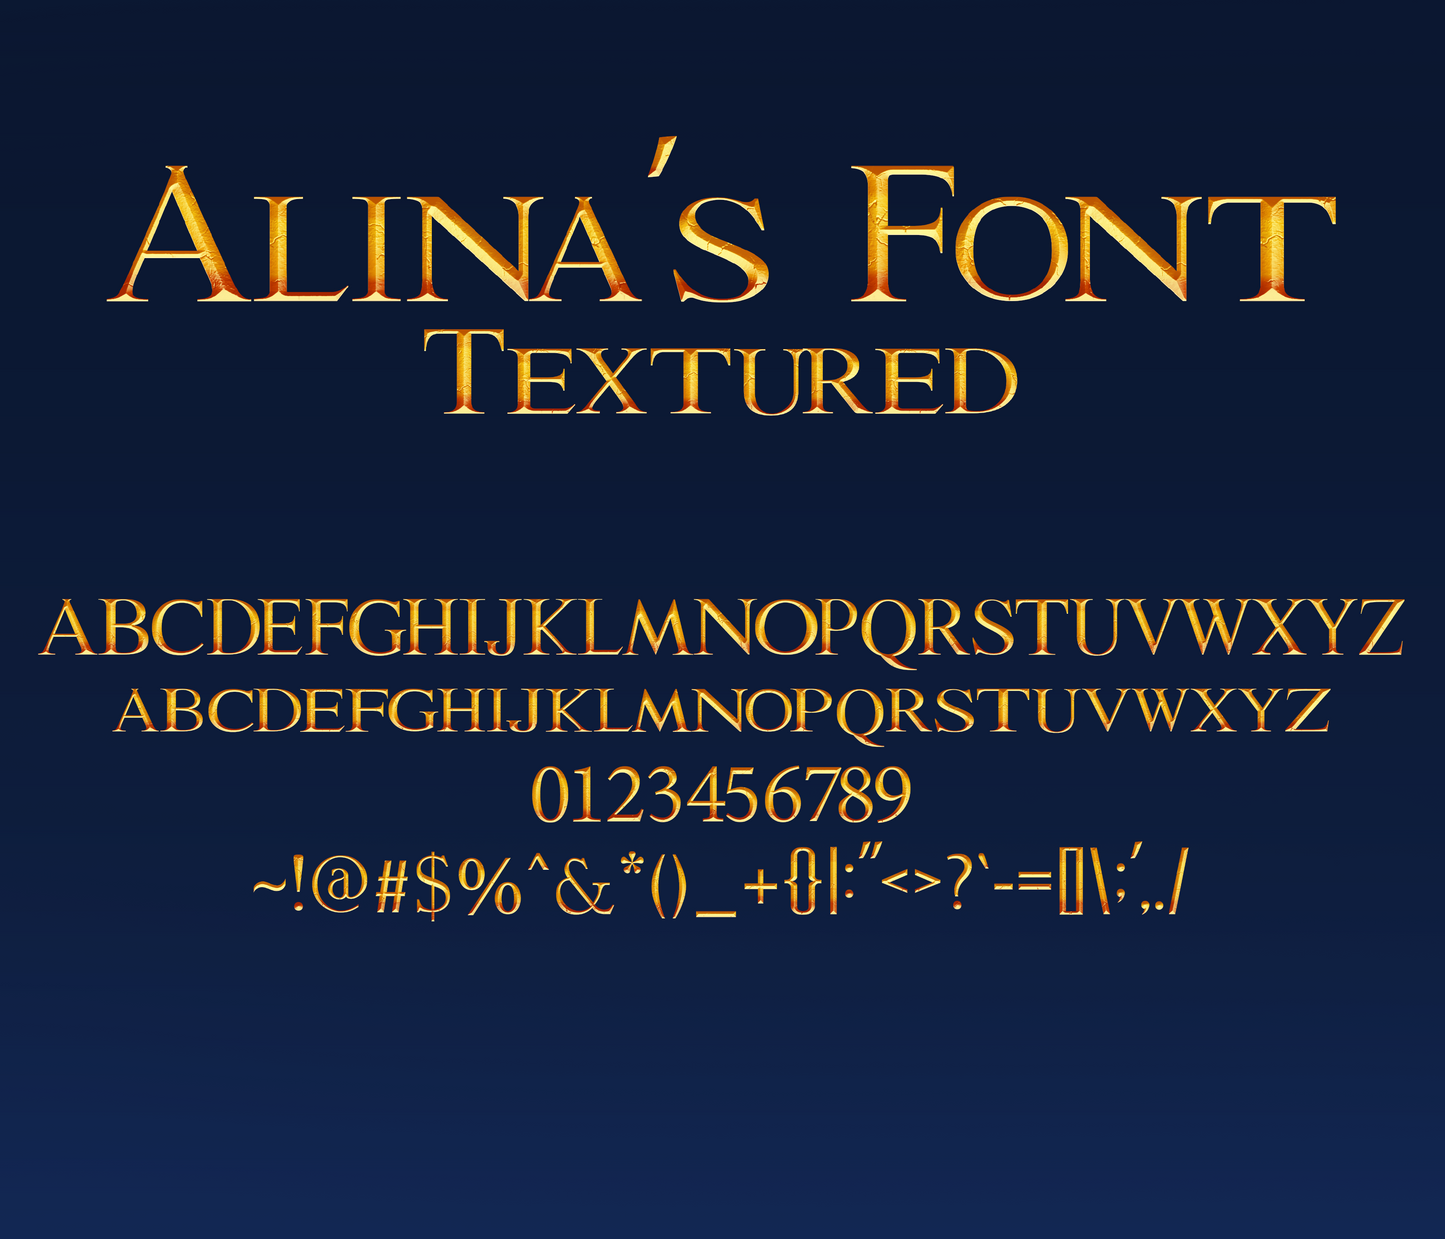 Mufasa: The Lion King Textured Font